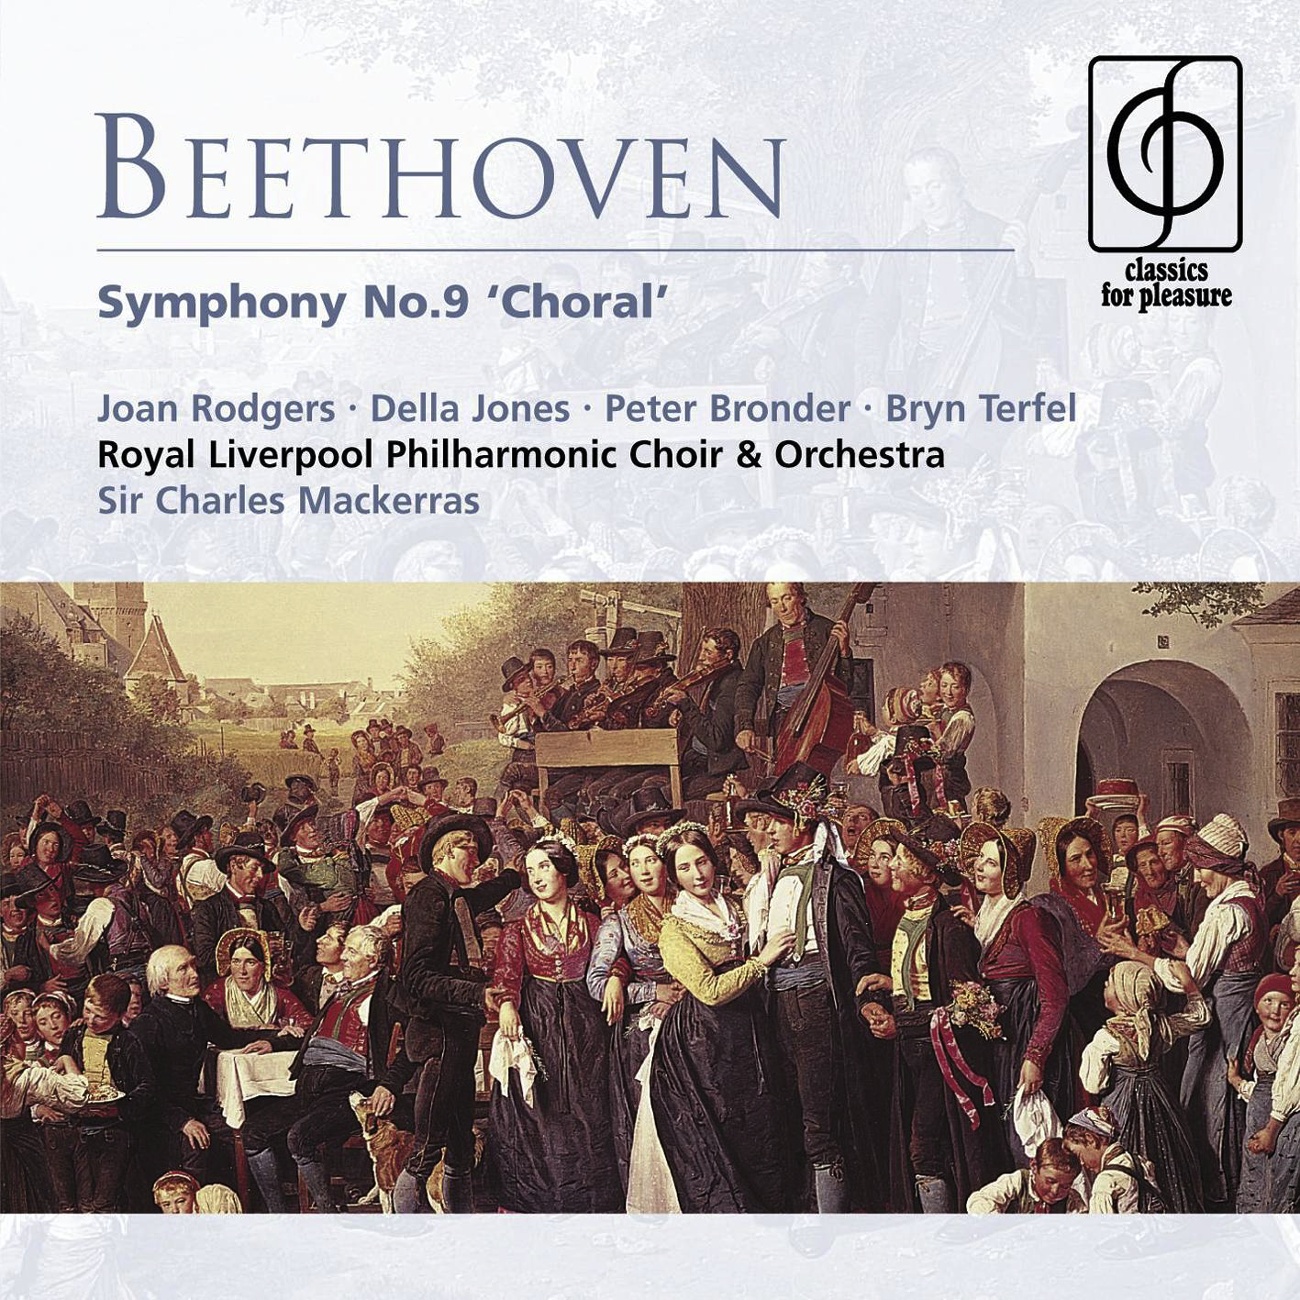 Beethoven: Symphony 9 'Choral'